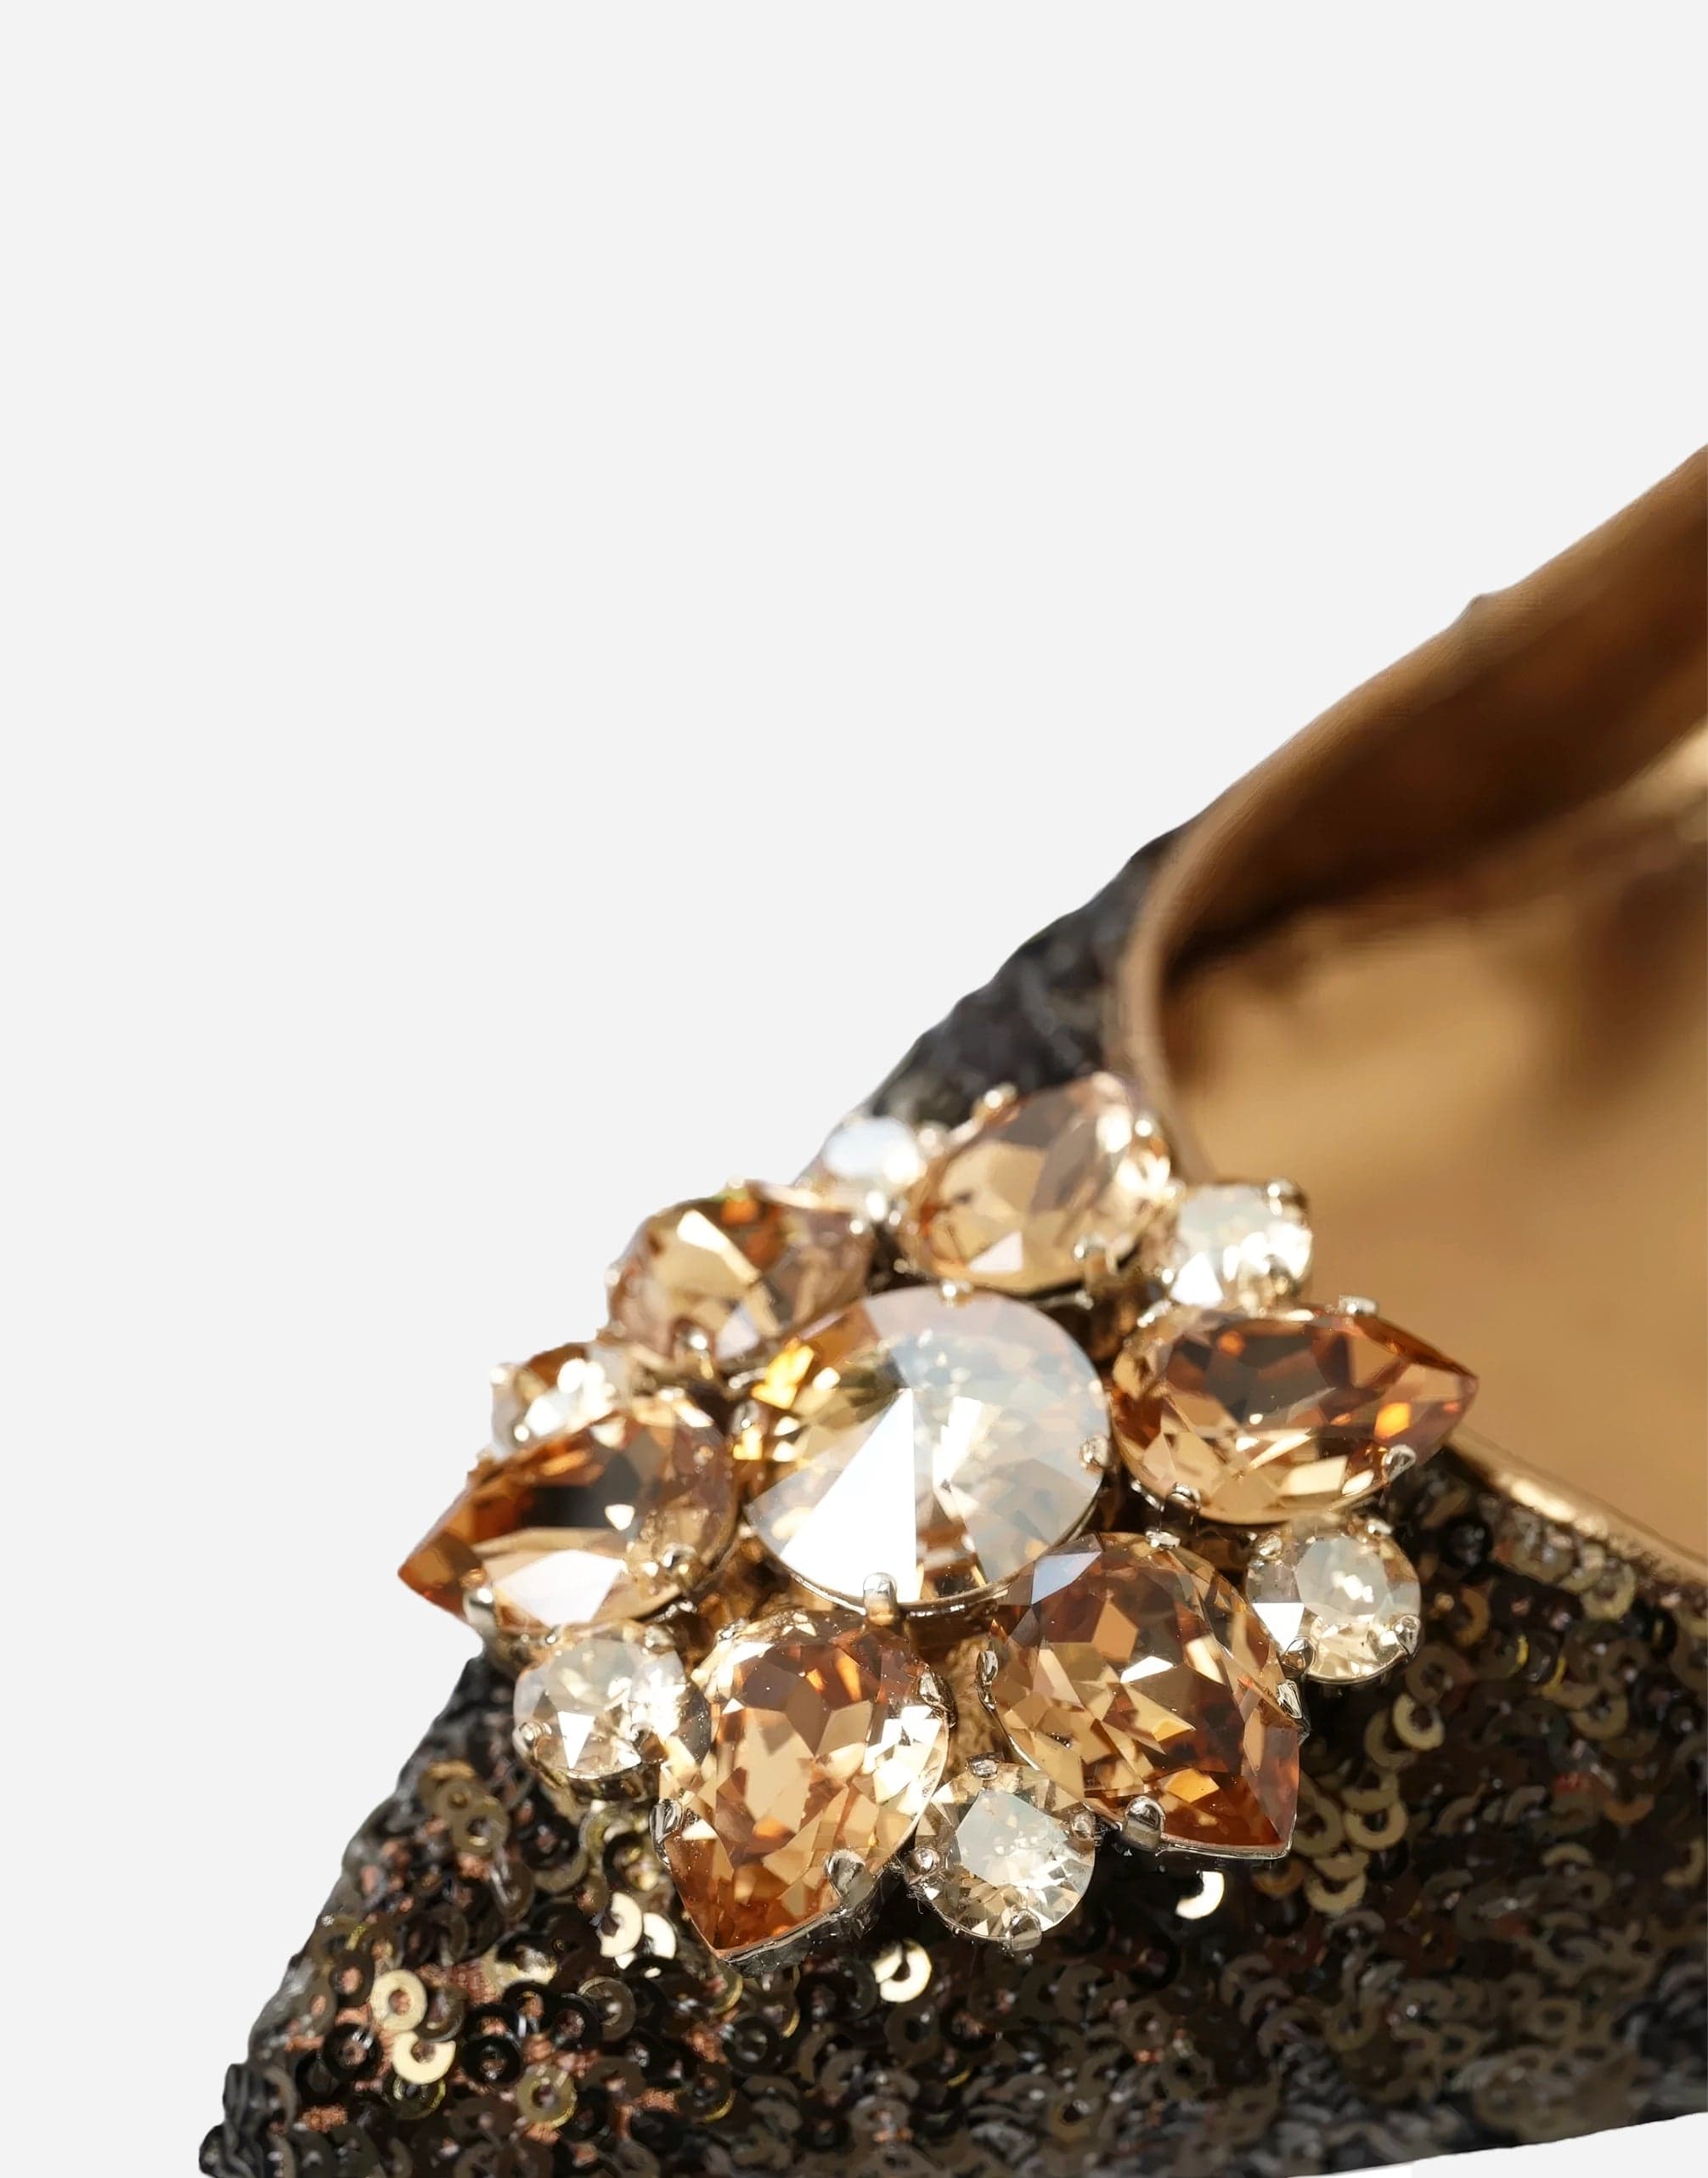 Dolce & Gabbana Sequin Bellucci Pumps With Crystal Embellishments